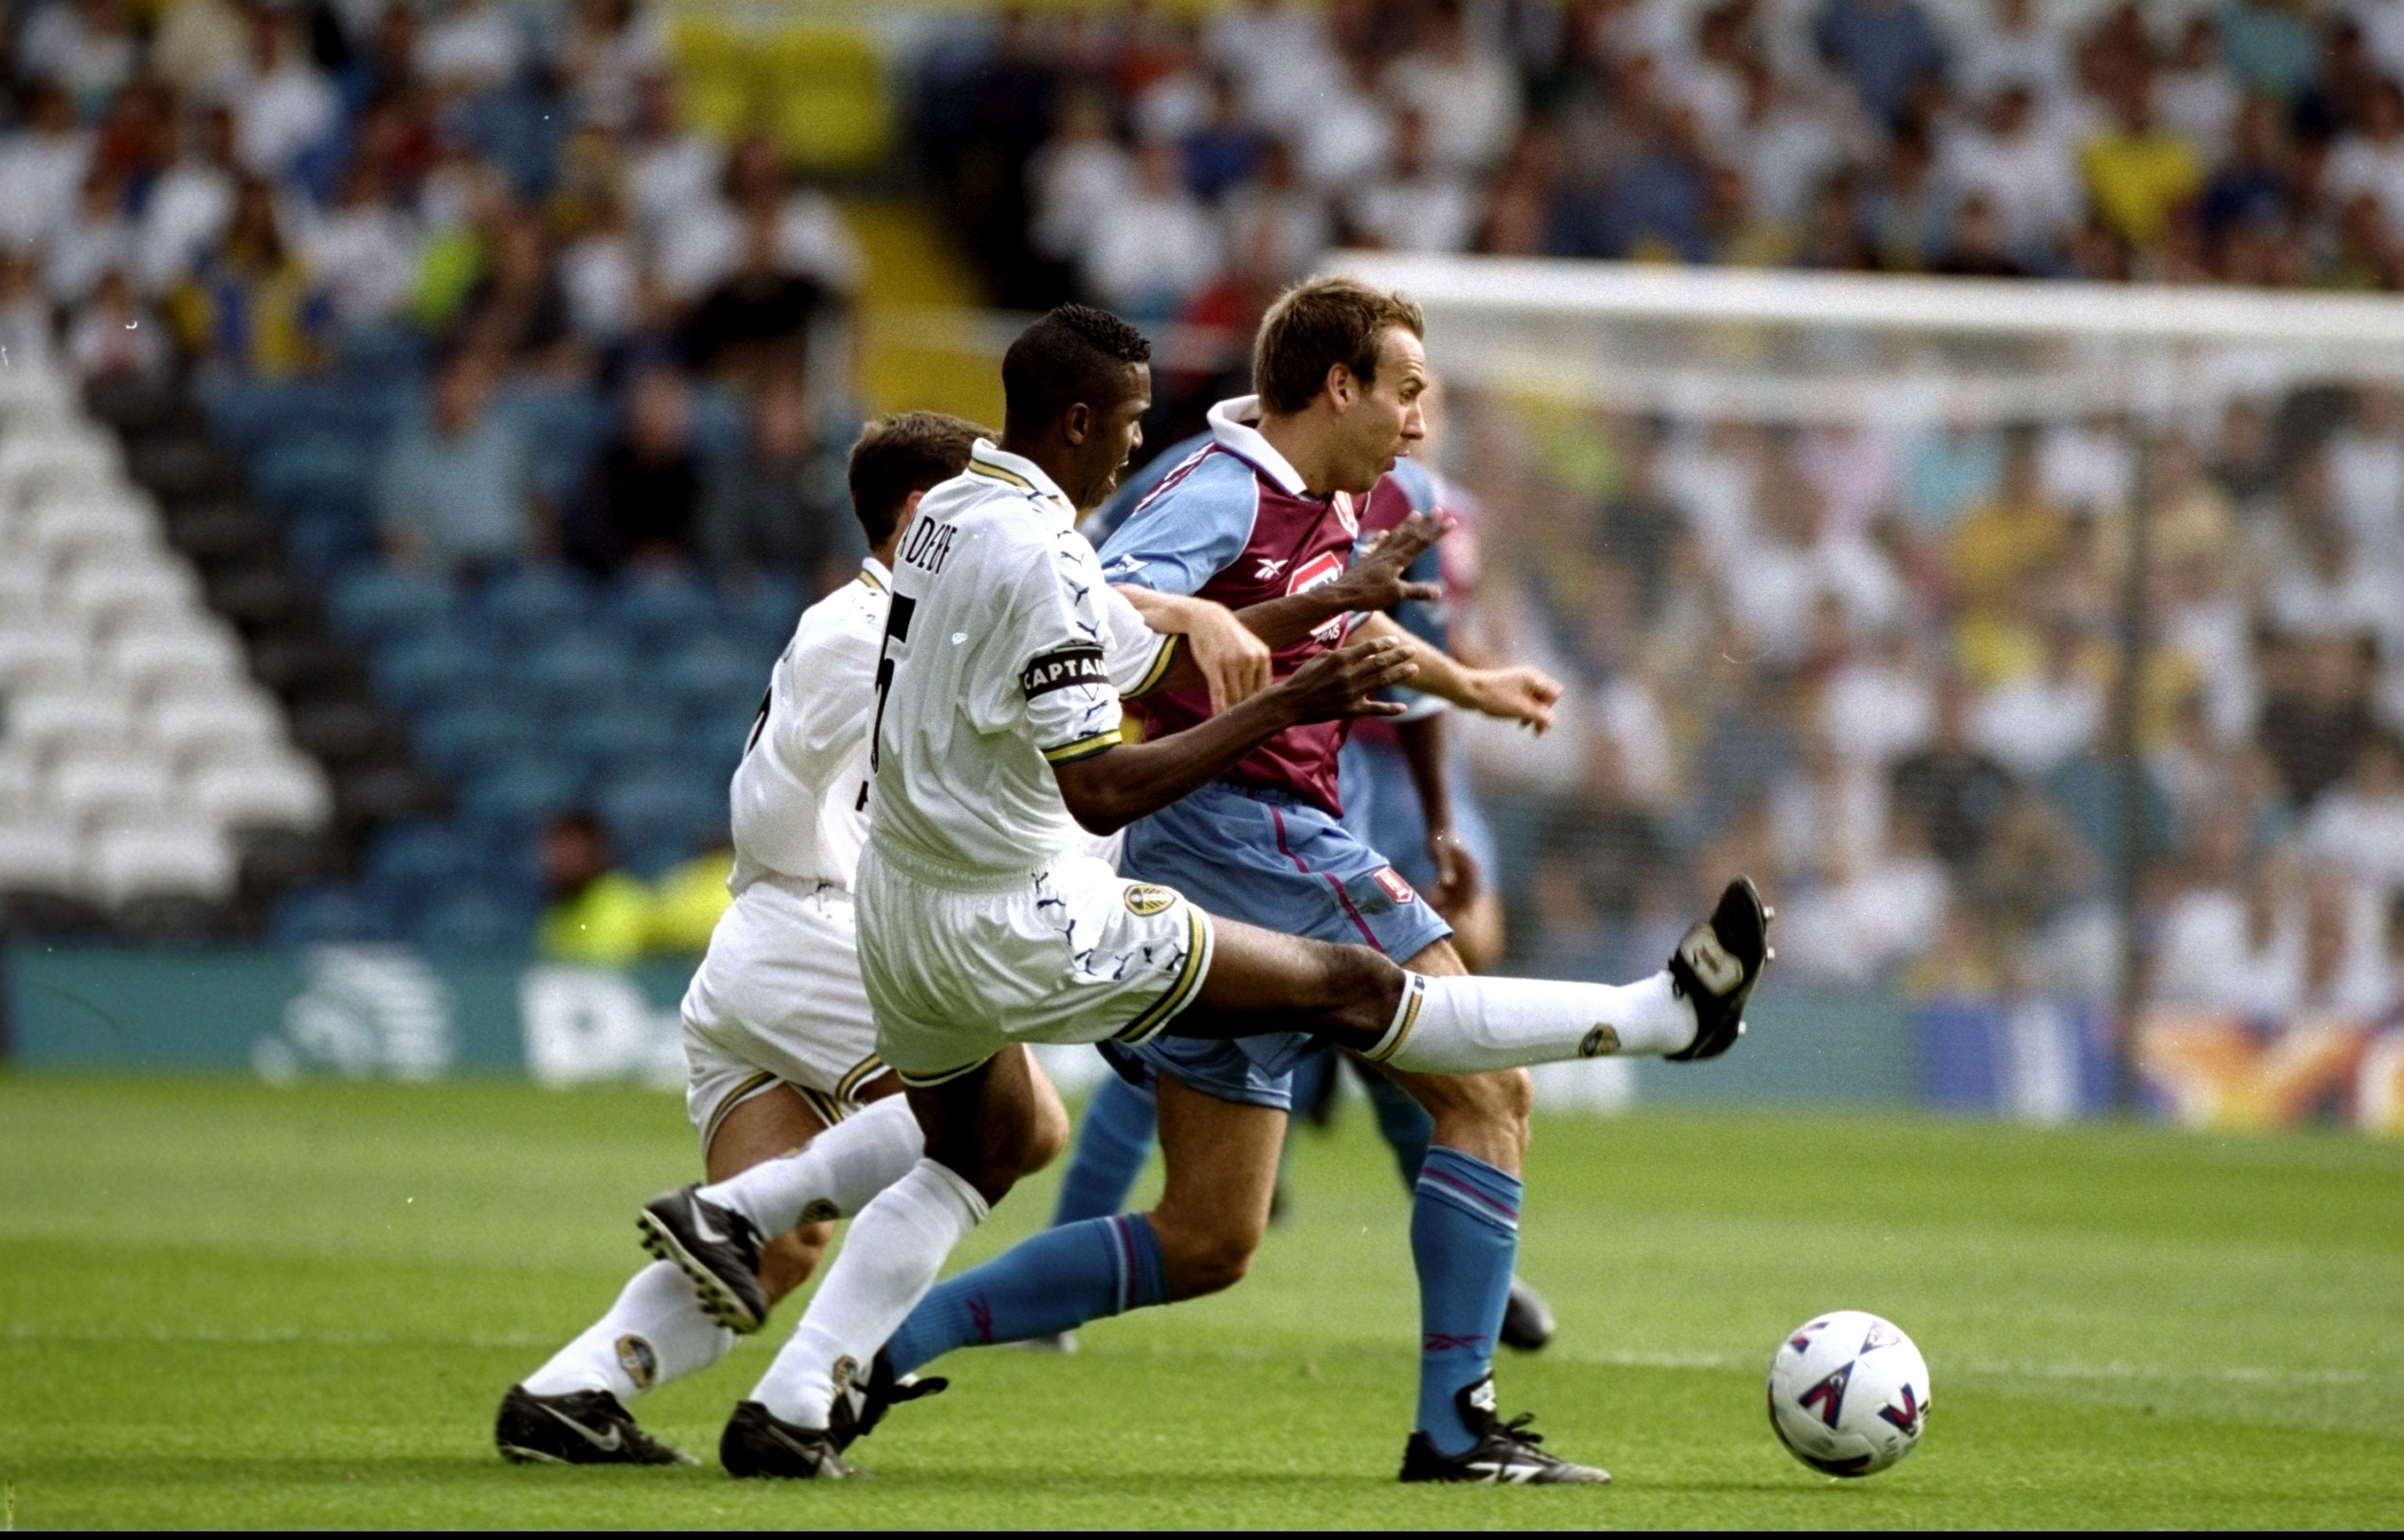 Radebe challenges Paul Merson during a match between Leeds and Aston Villa